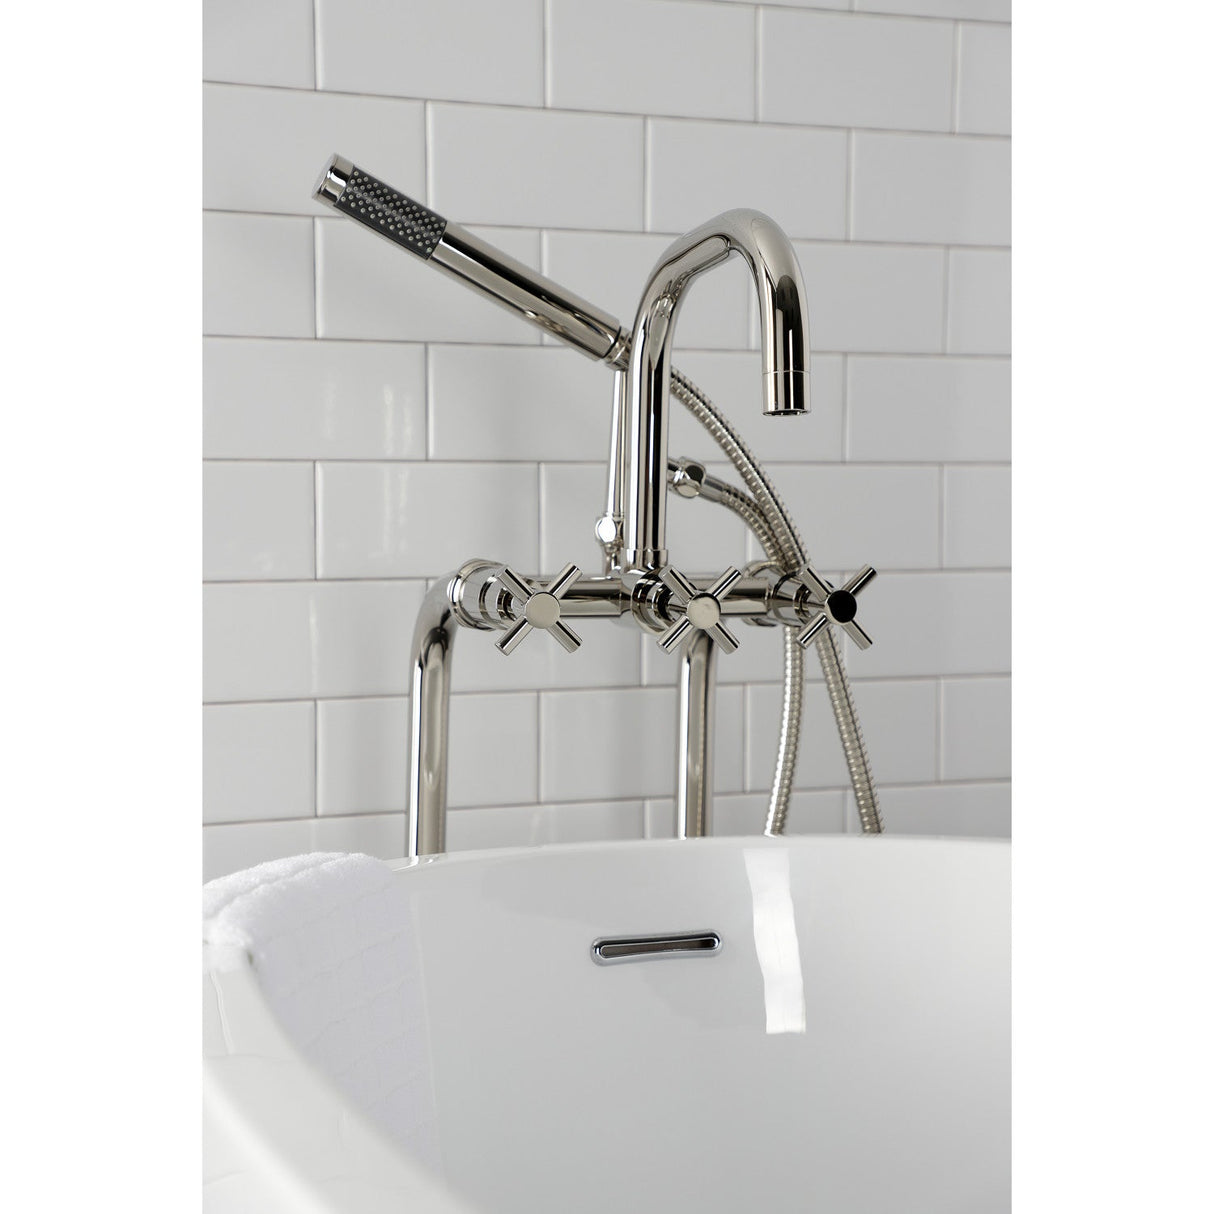 Concord CCK8406DX Freestanding Tub Faucet with Supply Line and Stop Valve, Polished Nickel